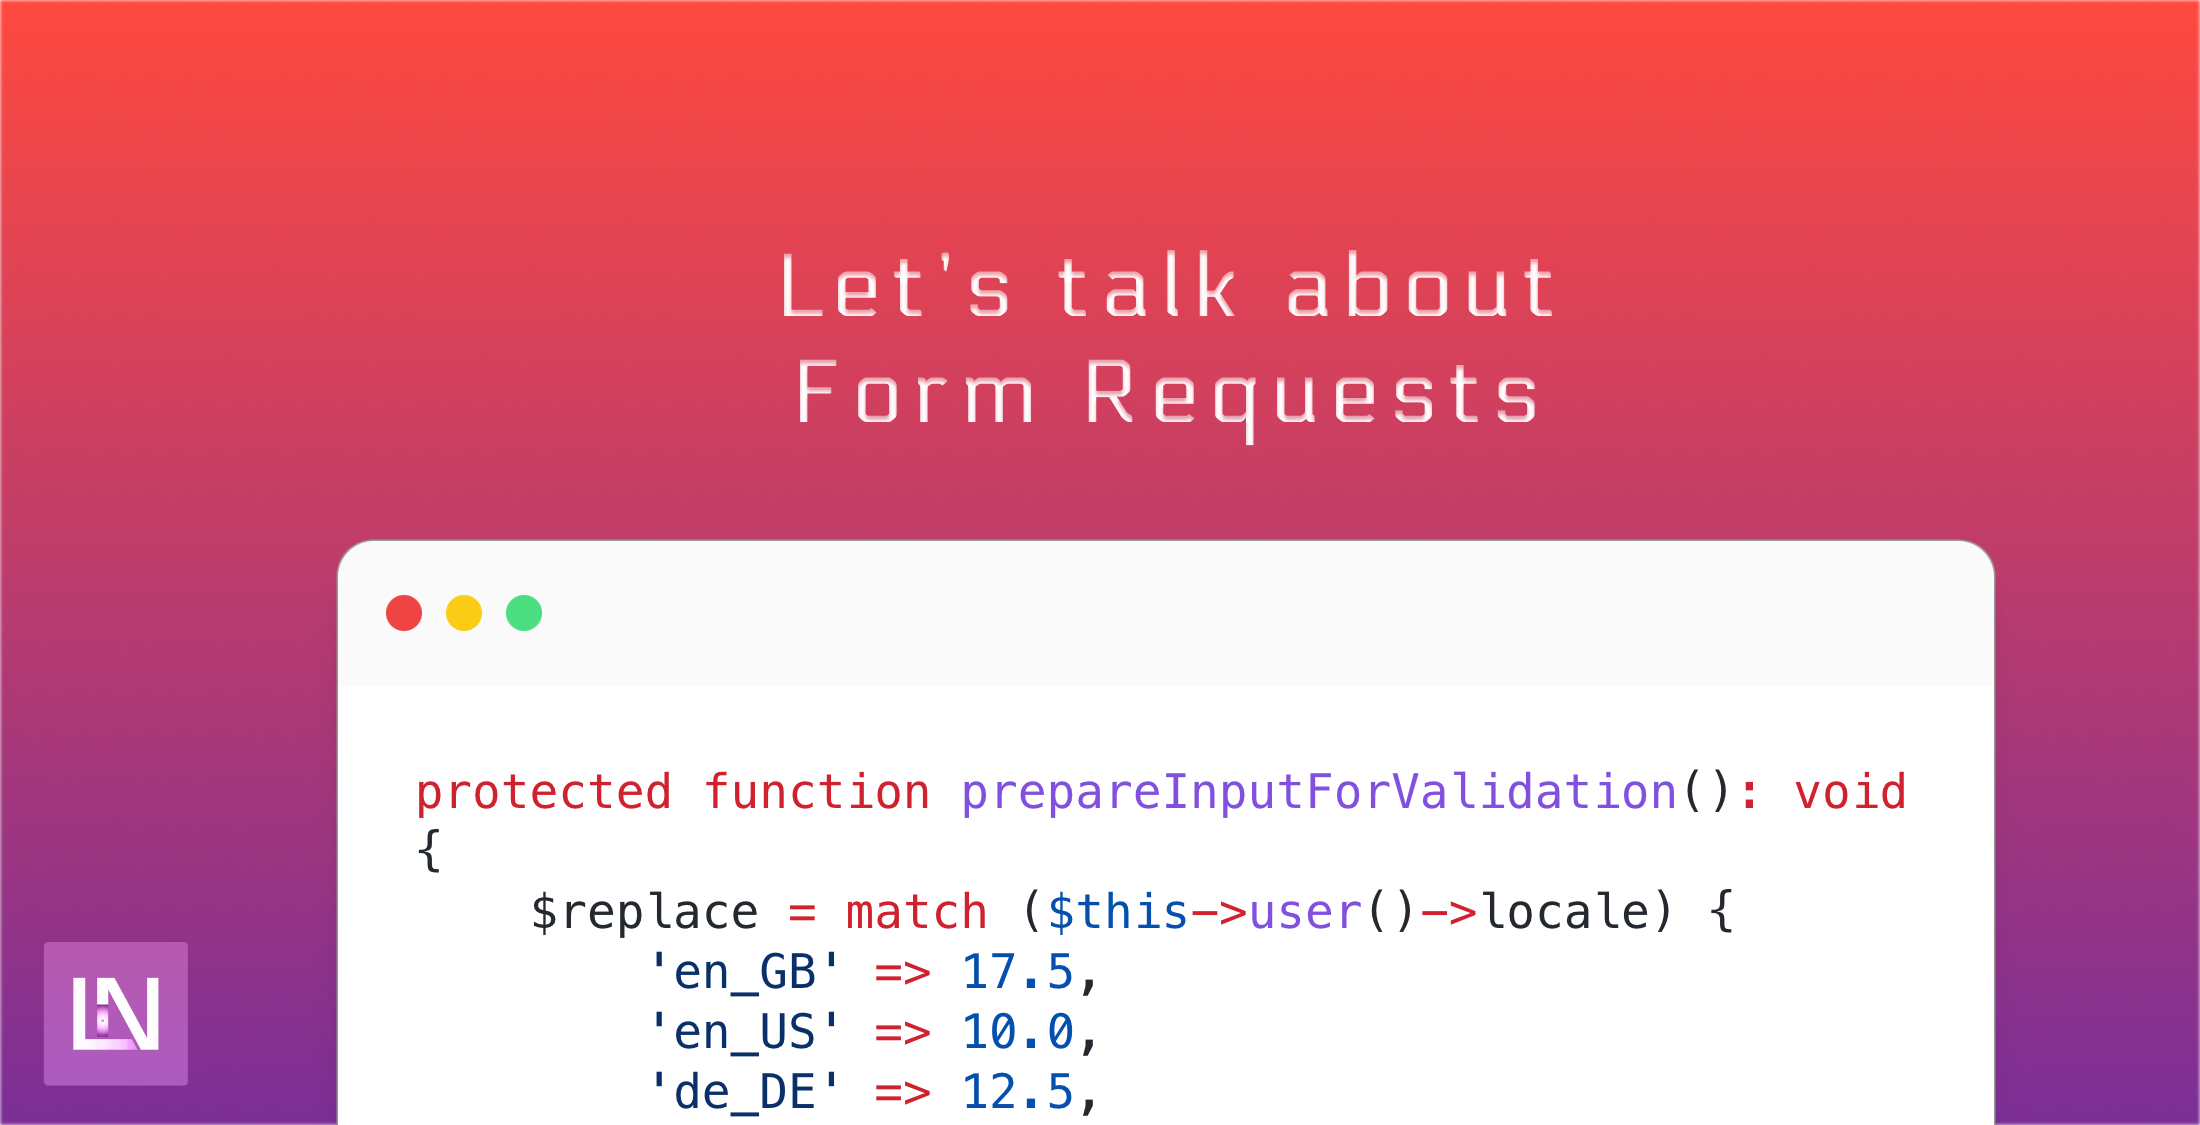 Let's talk about Form Requests image